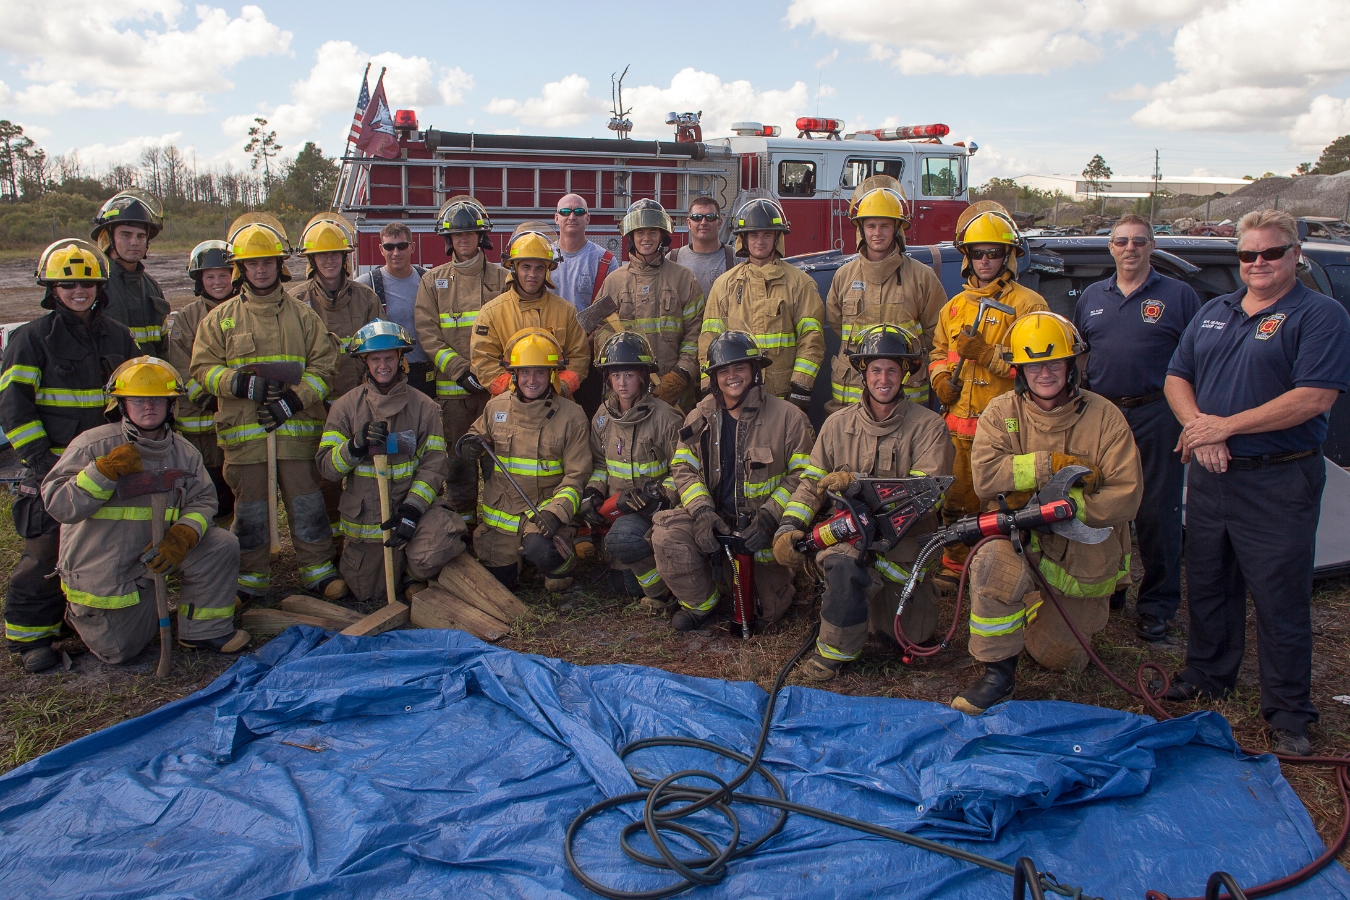 Group photo of firefighter training recruit group posing for a photo with their instructors, tools, and gear in front of a fire truck. 